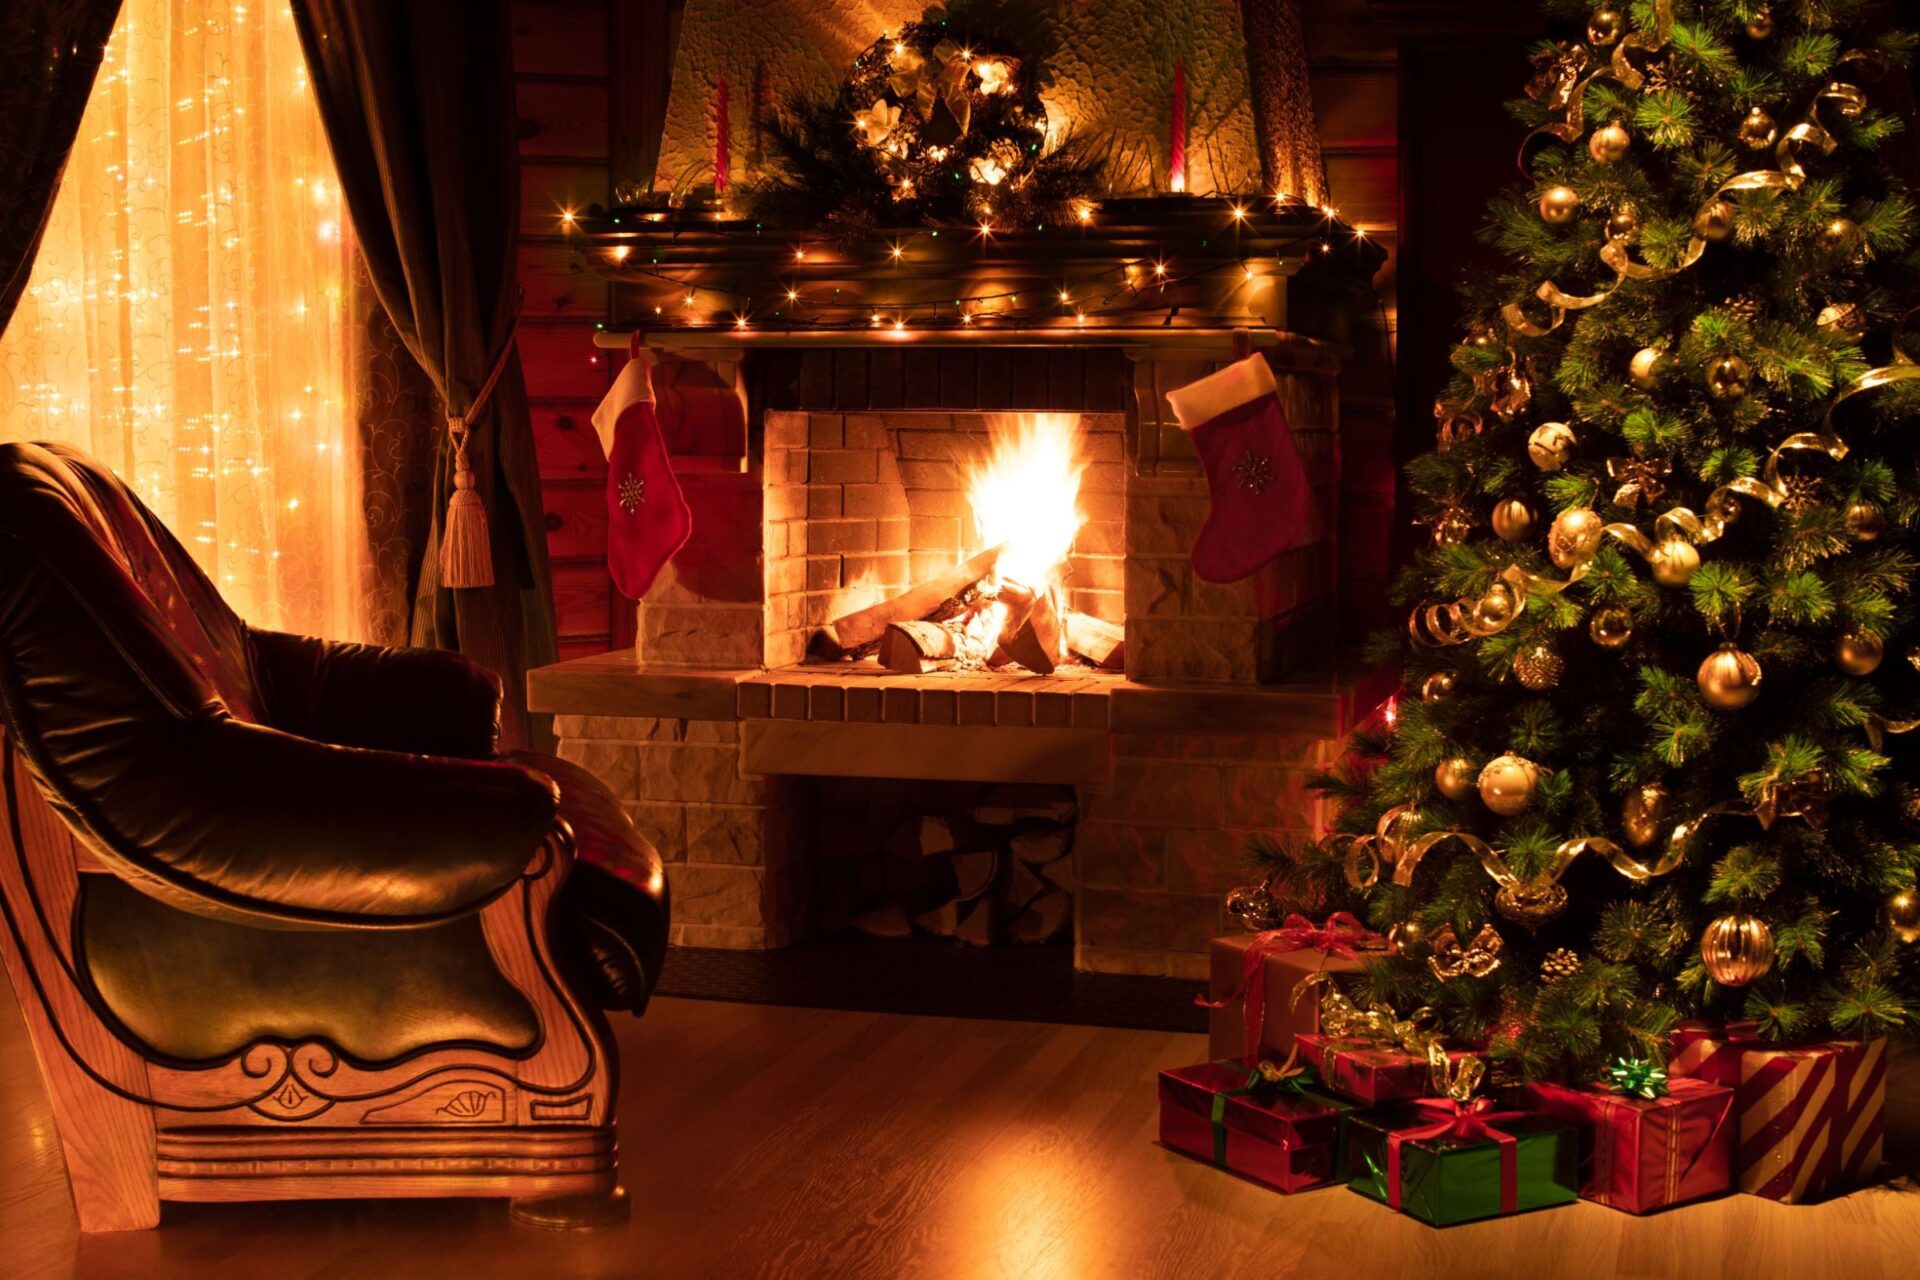 Don’t burn your Christmas tree in your wood-burning stove!